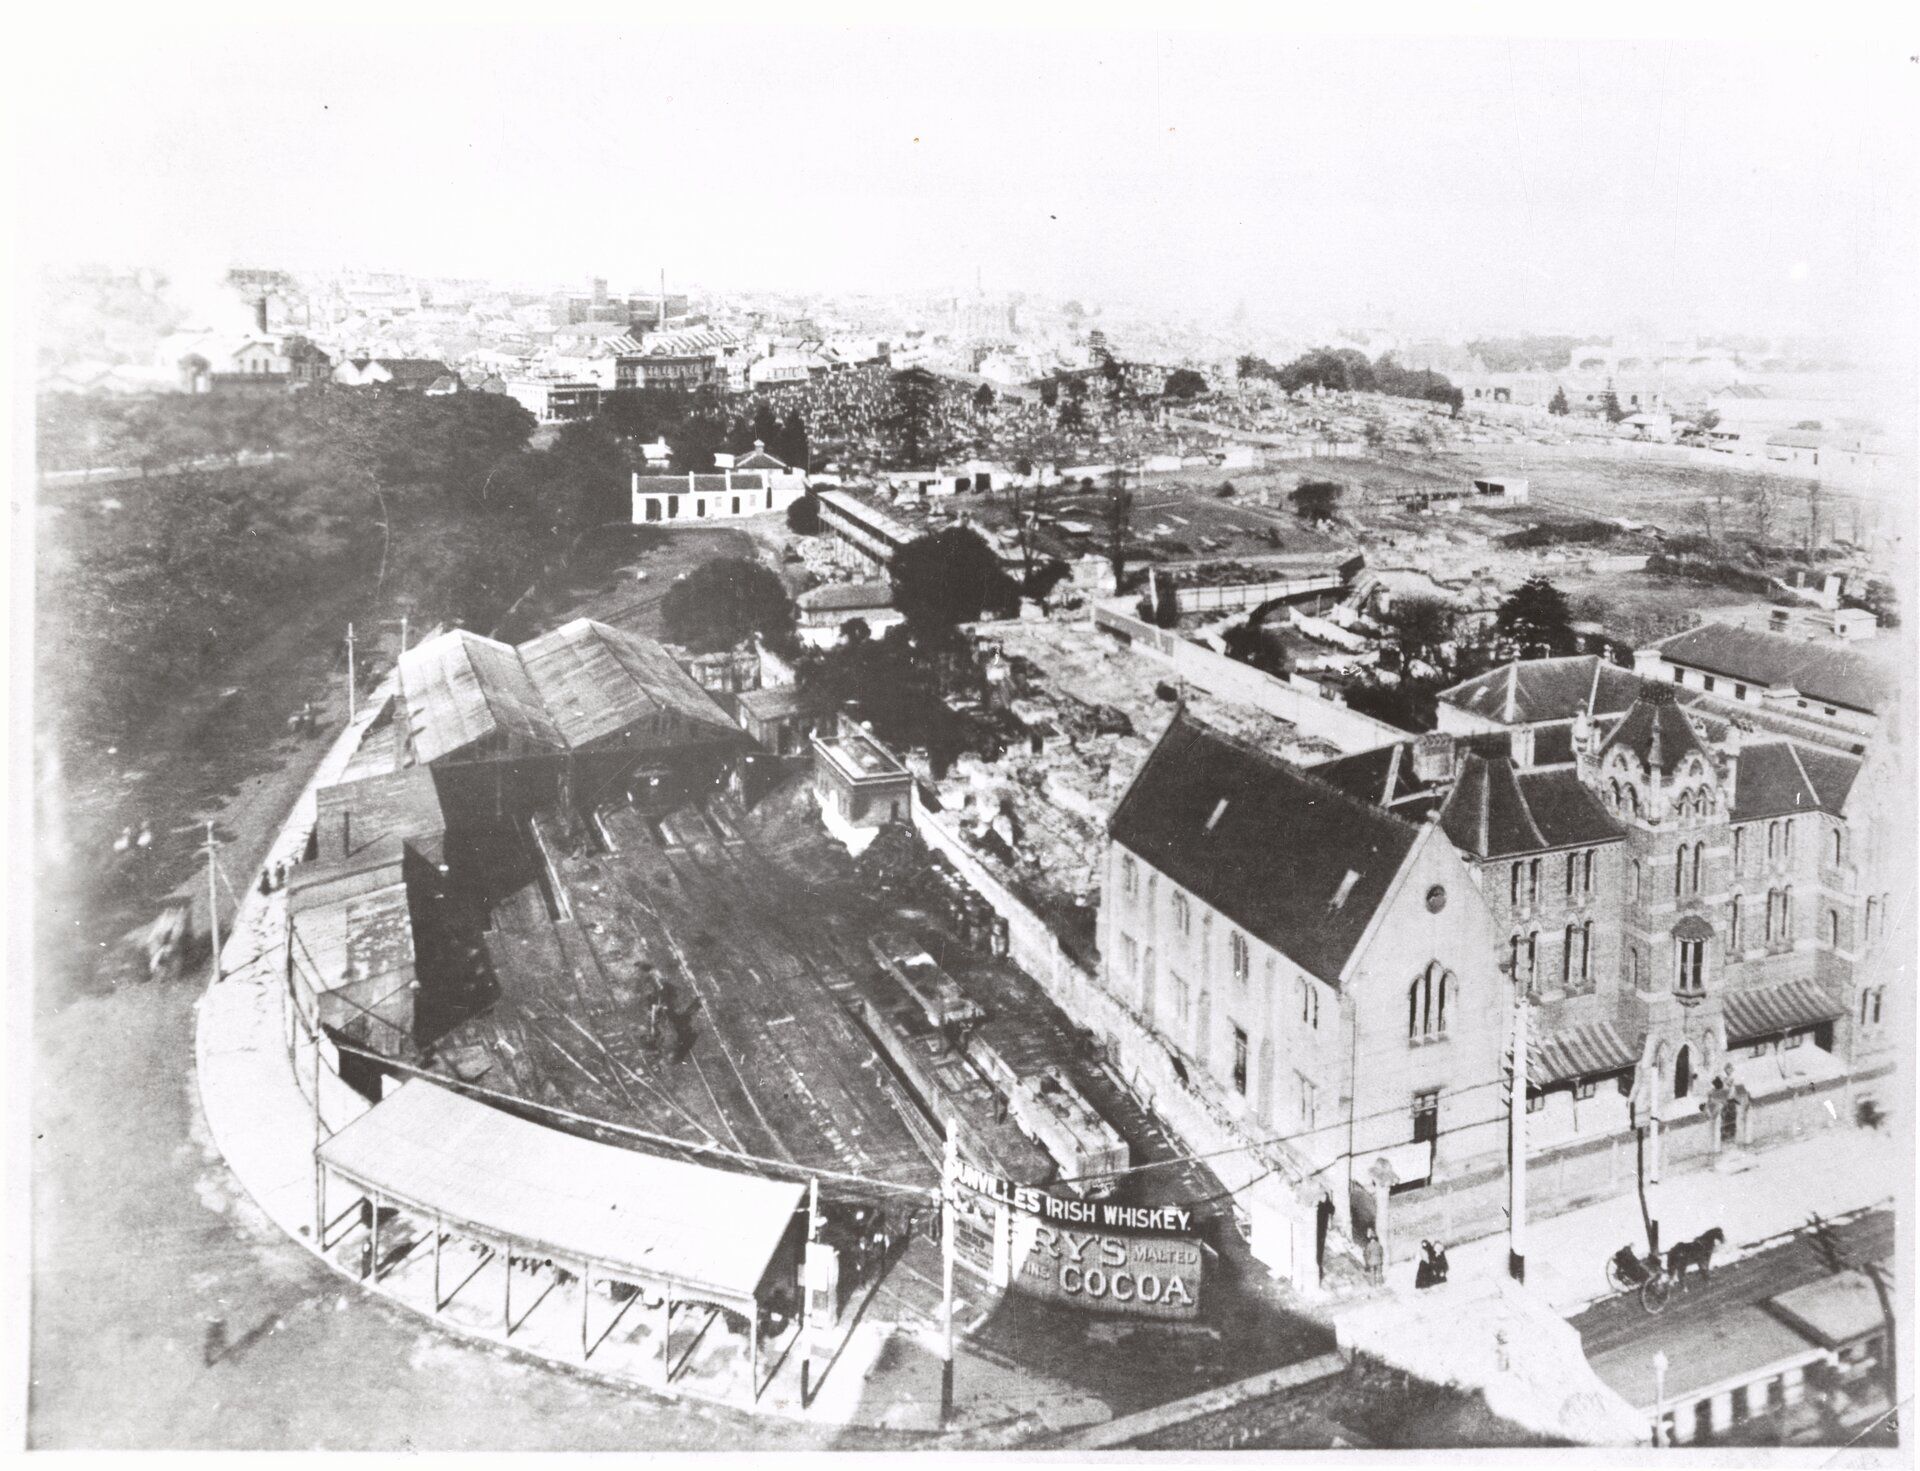 Tram depot with cemetery in the background